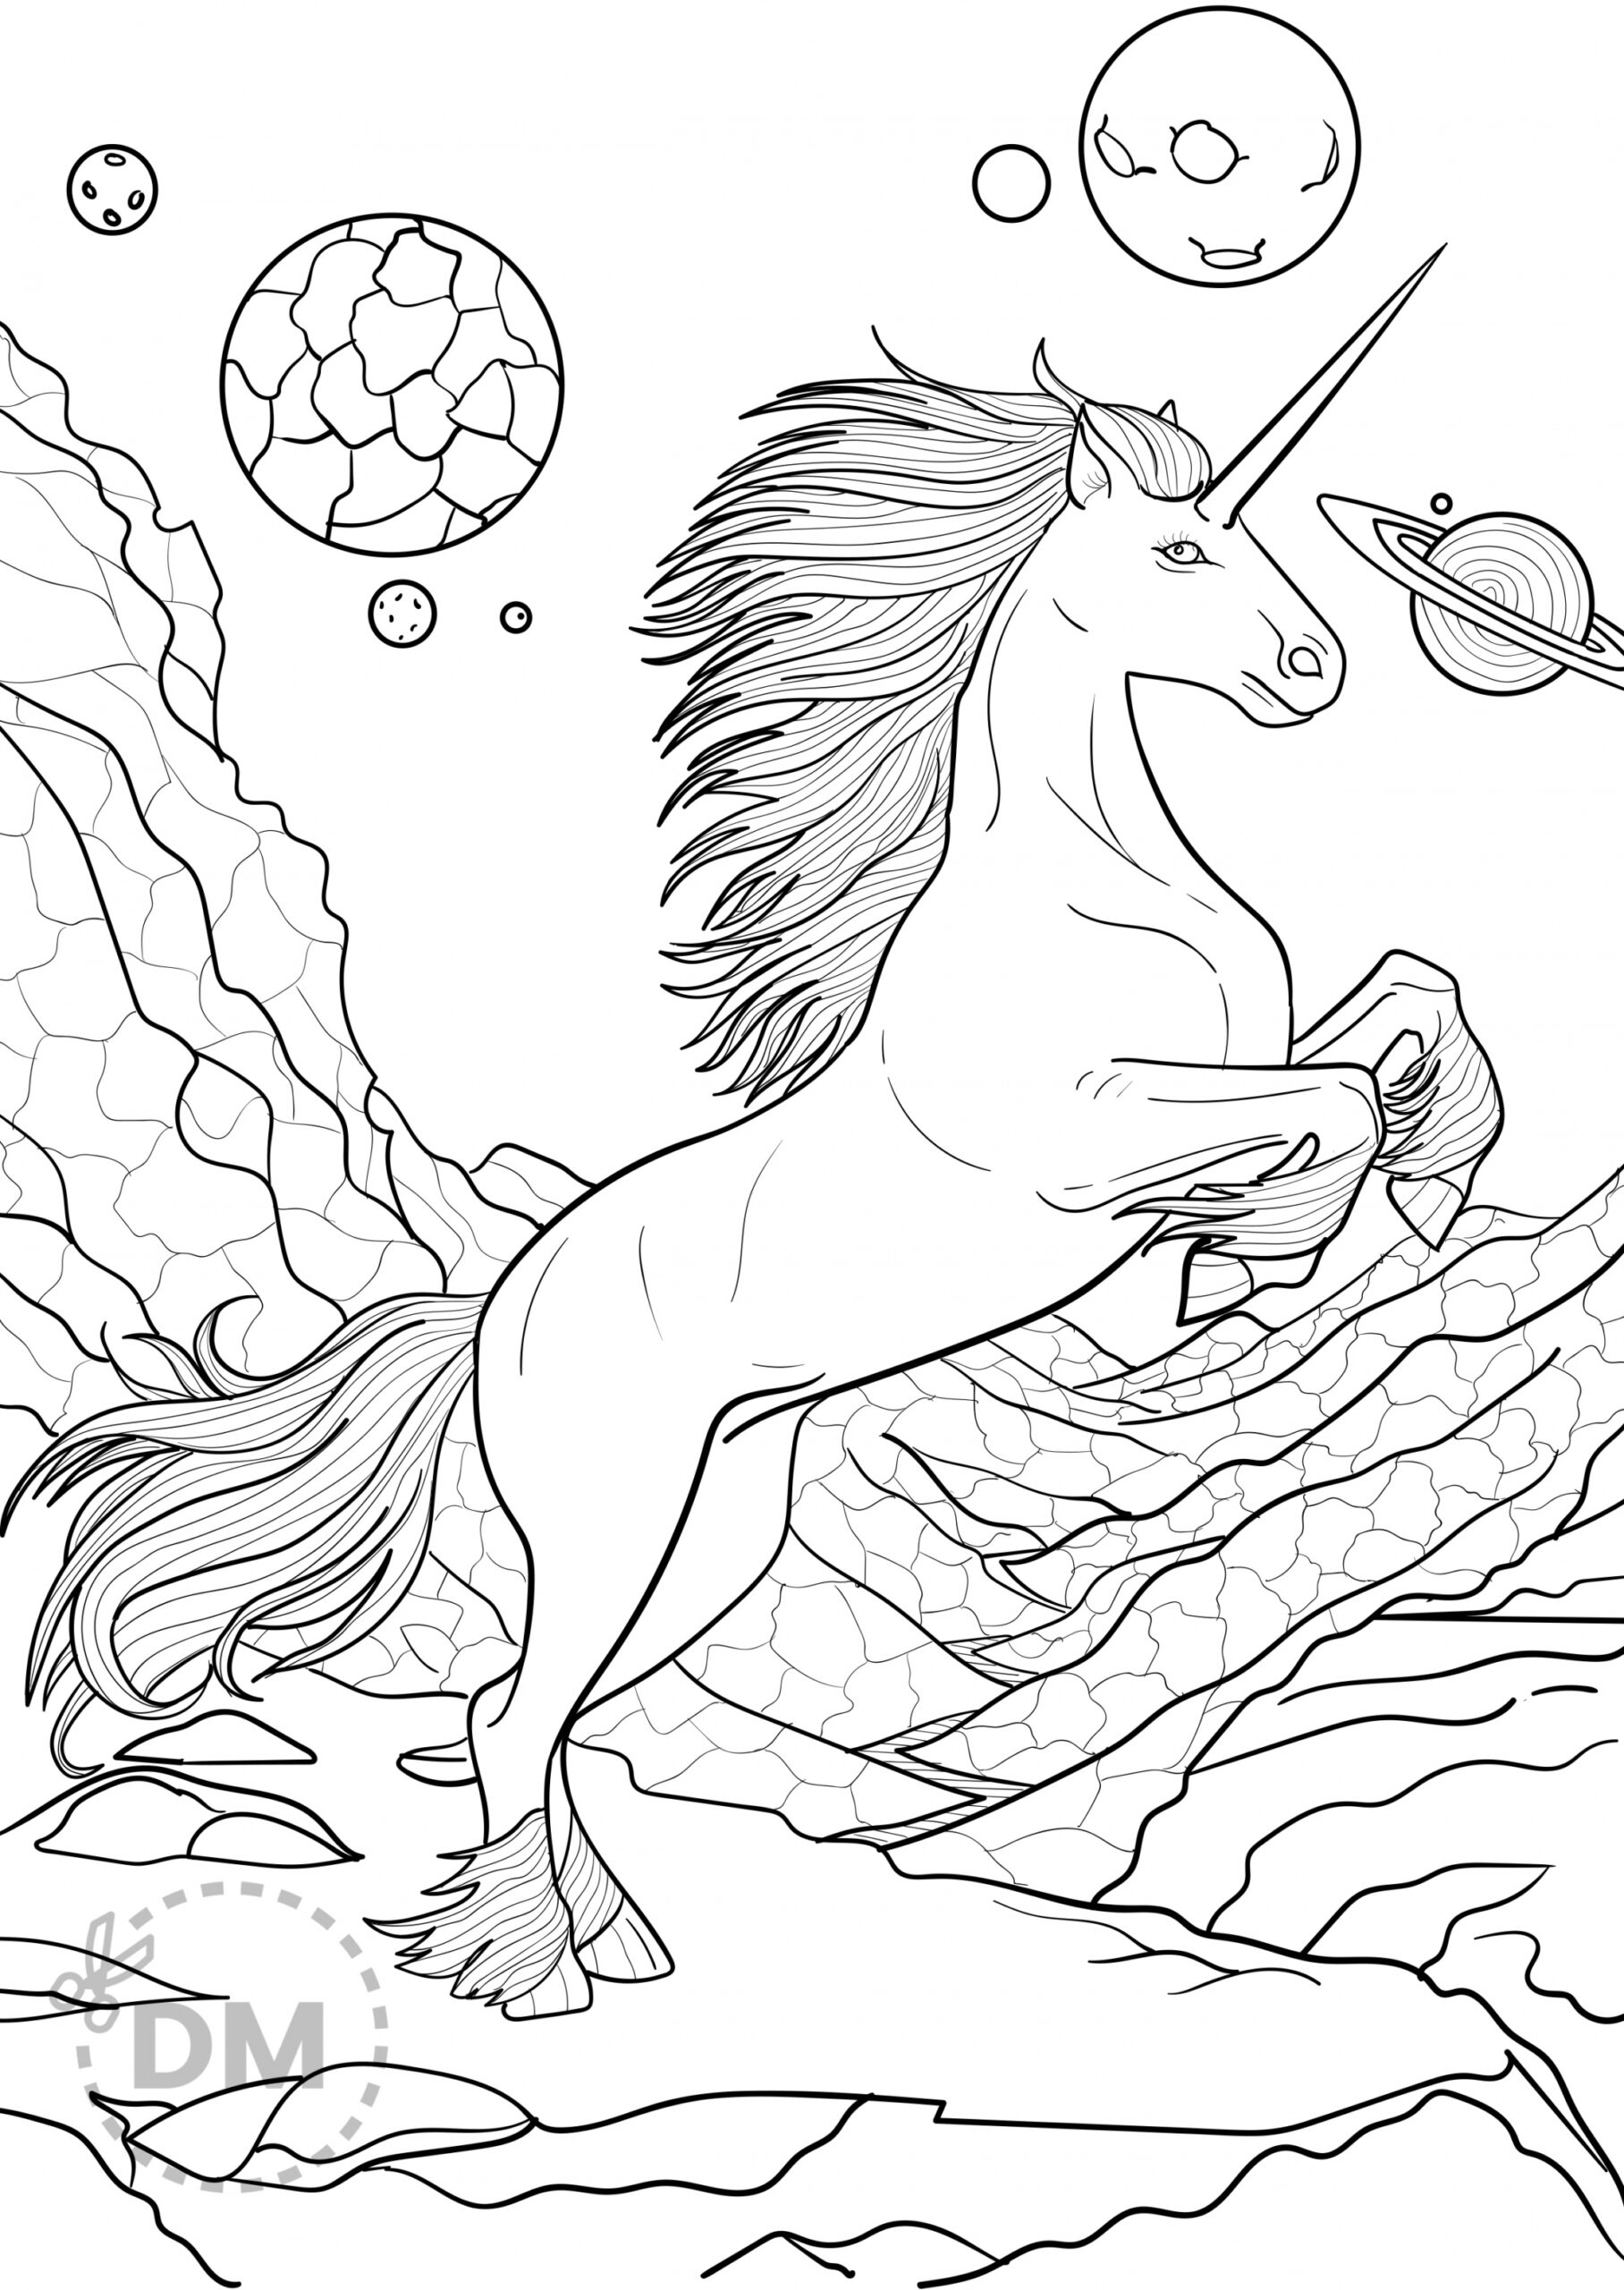 Unicorn Coloring Page for Adults  Printable Page for Download  - FREE Printables - Adult Unicorn Coloring Pages